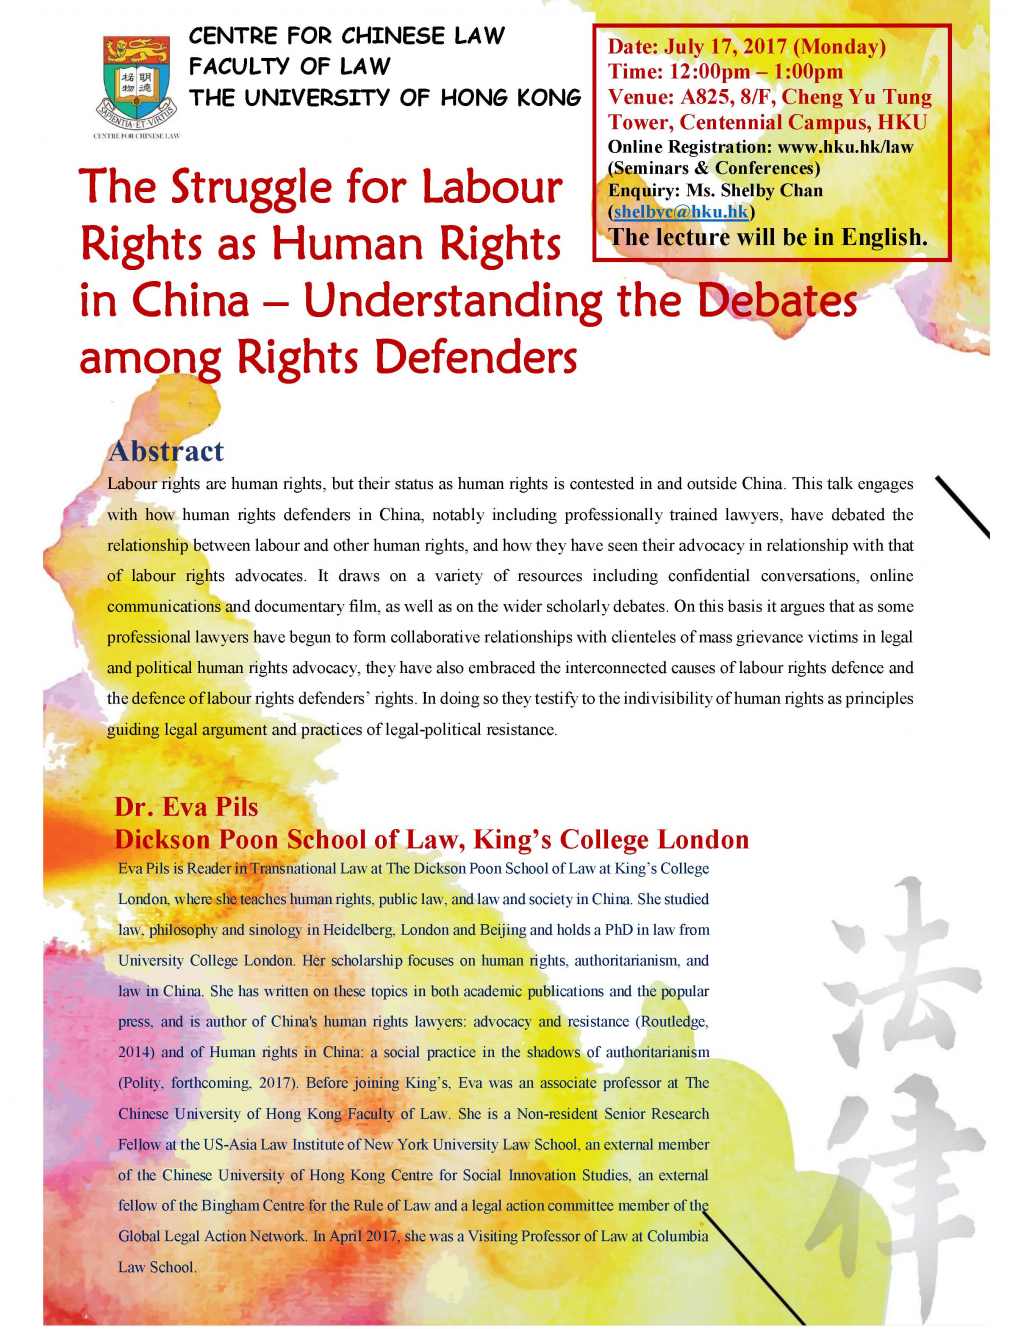 The Struggle for Labour Rights as Human Rights in China - Understanding the Debates among Rights Defenders